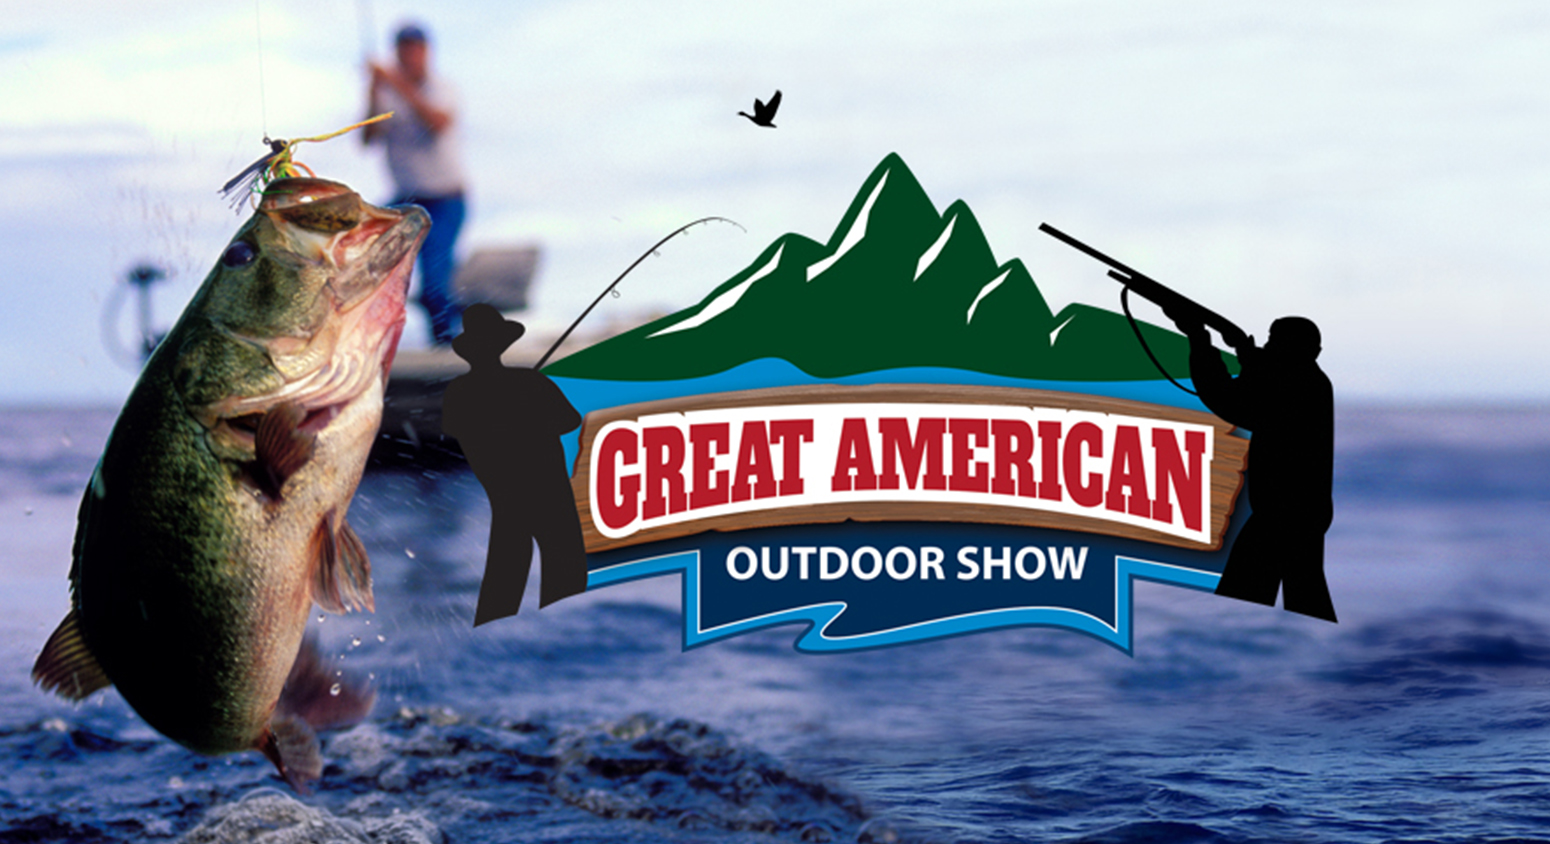 Download the Great American Outdoor Show Mobile App